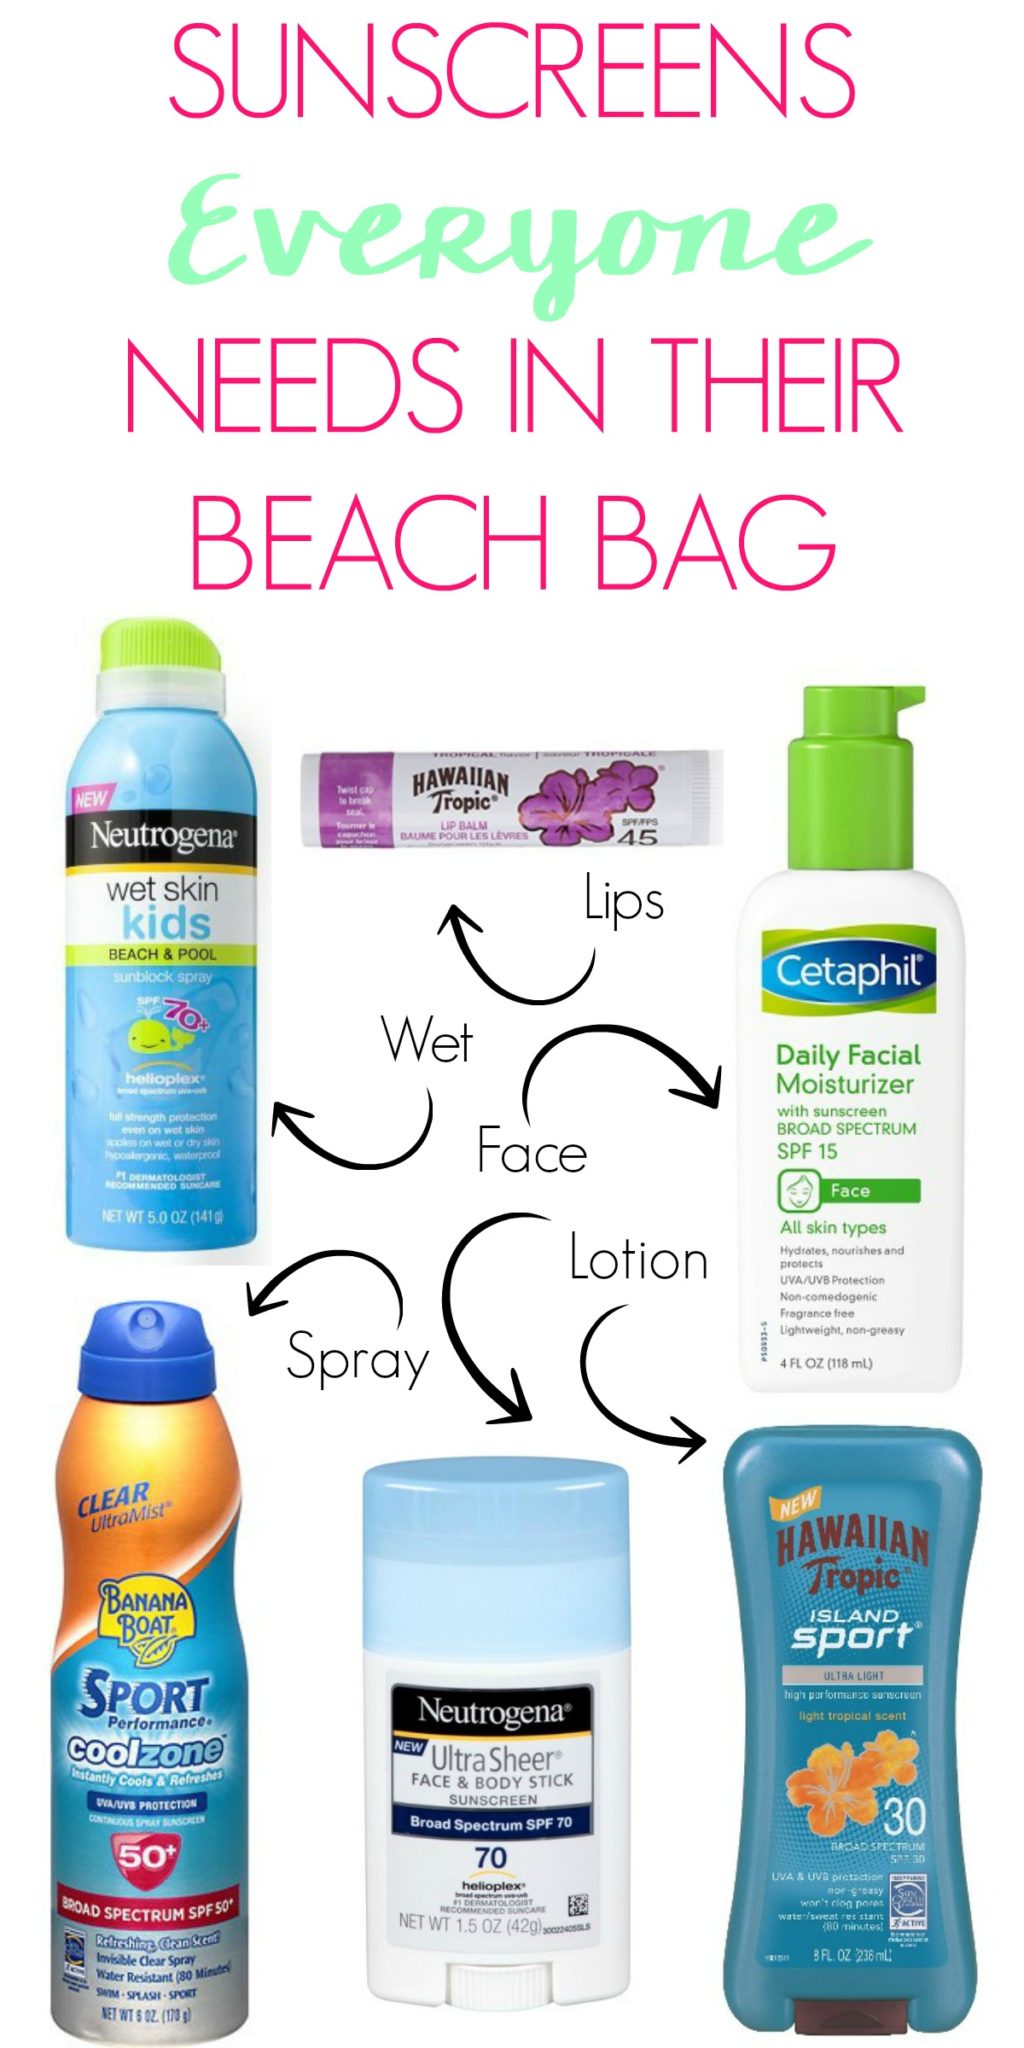 Protect your family's skin this summer in the sun. Check out this list of 5 Sunscreens Everyone Needs in Their Beach Bag and why!